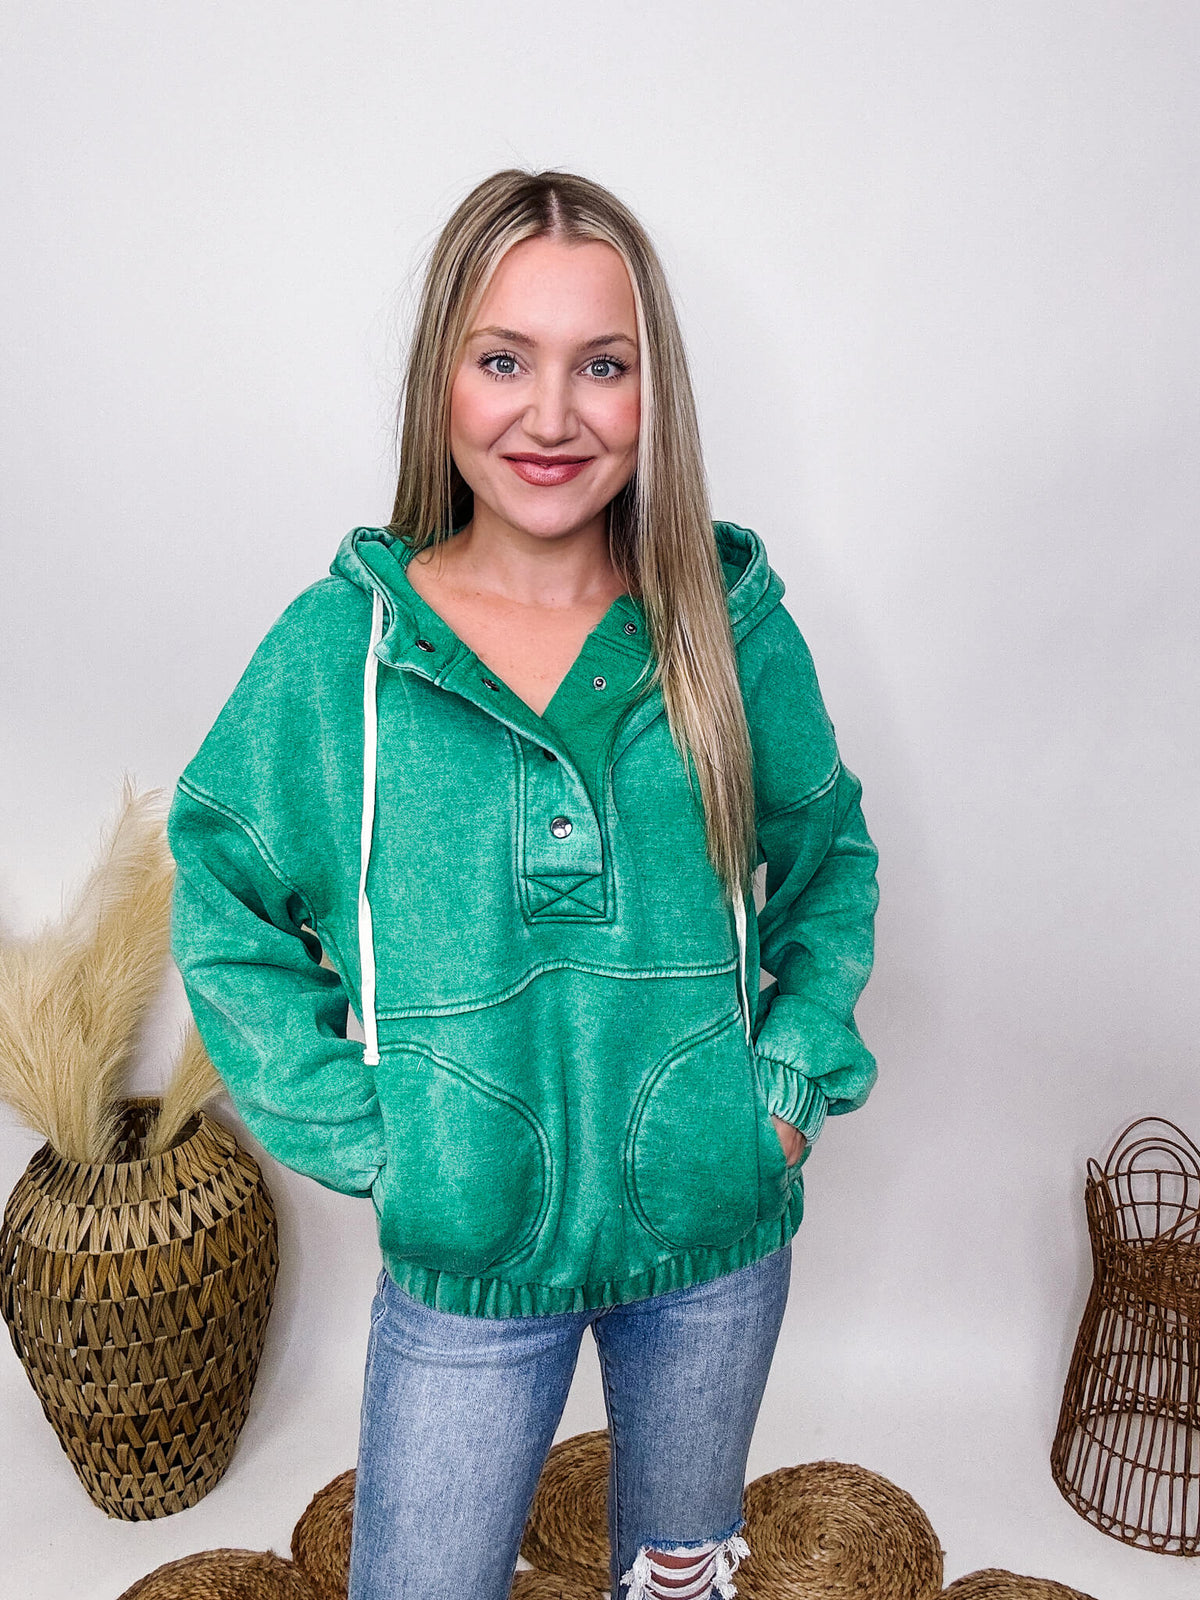 Zenana Kelly Green Acid Washed Half Button Up Hoodie Pullover Side Pockets Ribbed Elastic Cuff and Hem Details Oversized Fit 58% Cotton, 37% Polyester, 5% Spandex